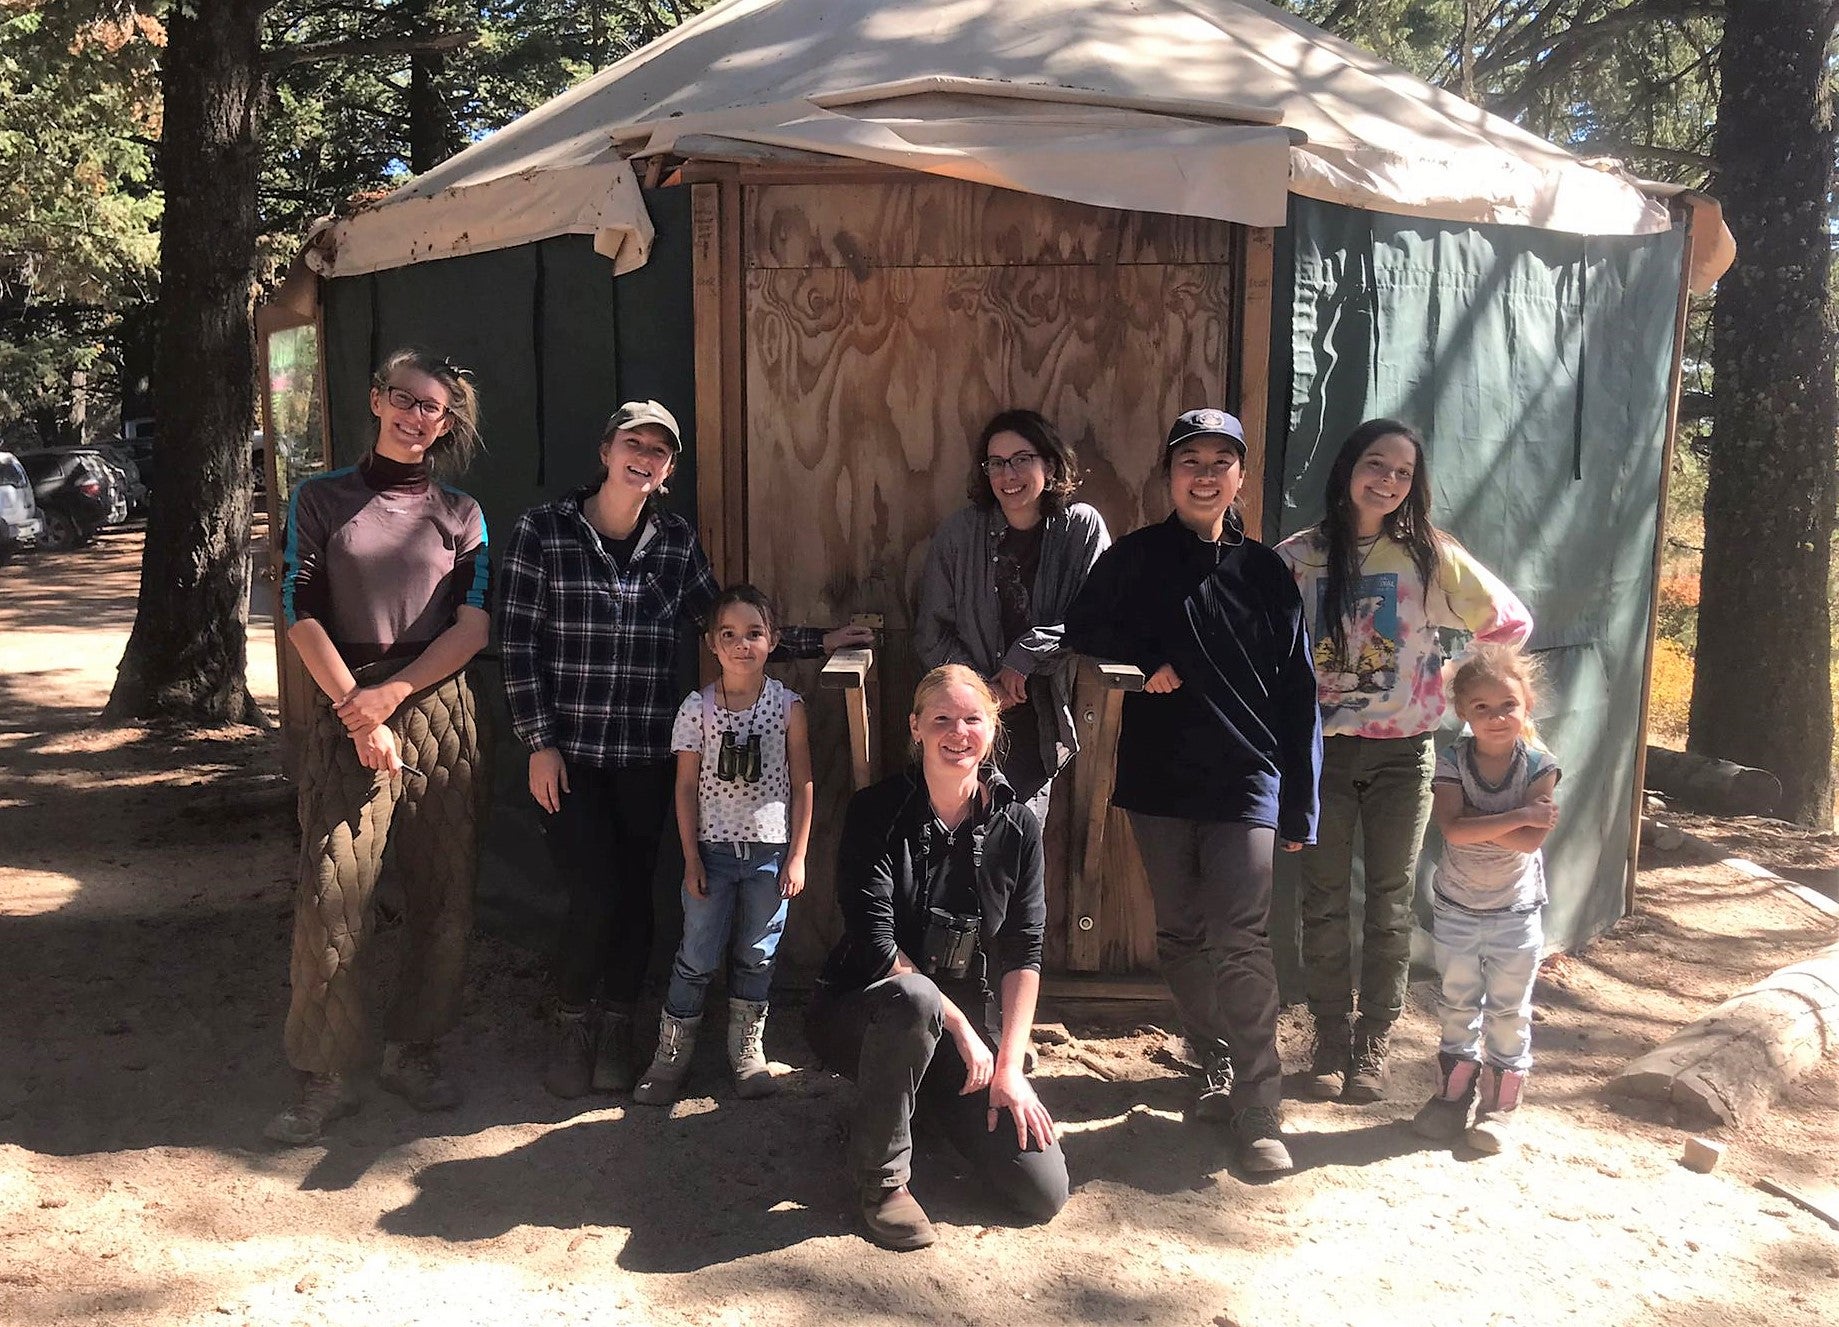 a group of scientists posing for a picture with smiling visitors outside in front of a green yurt under some trees